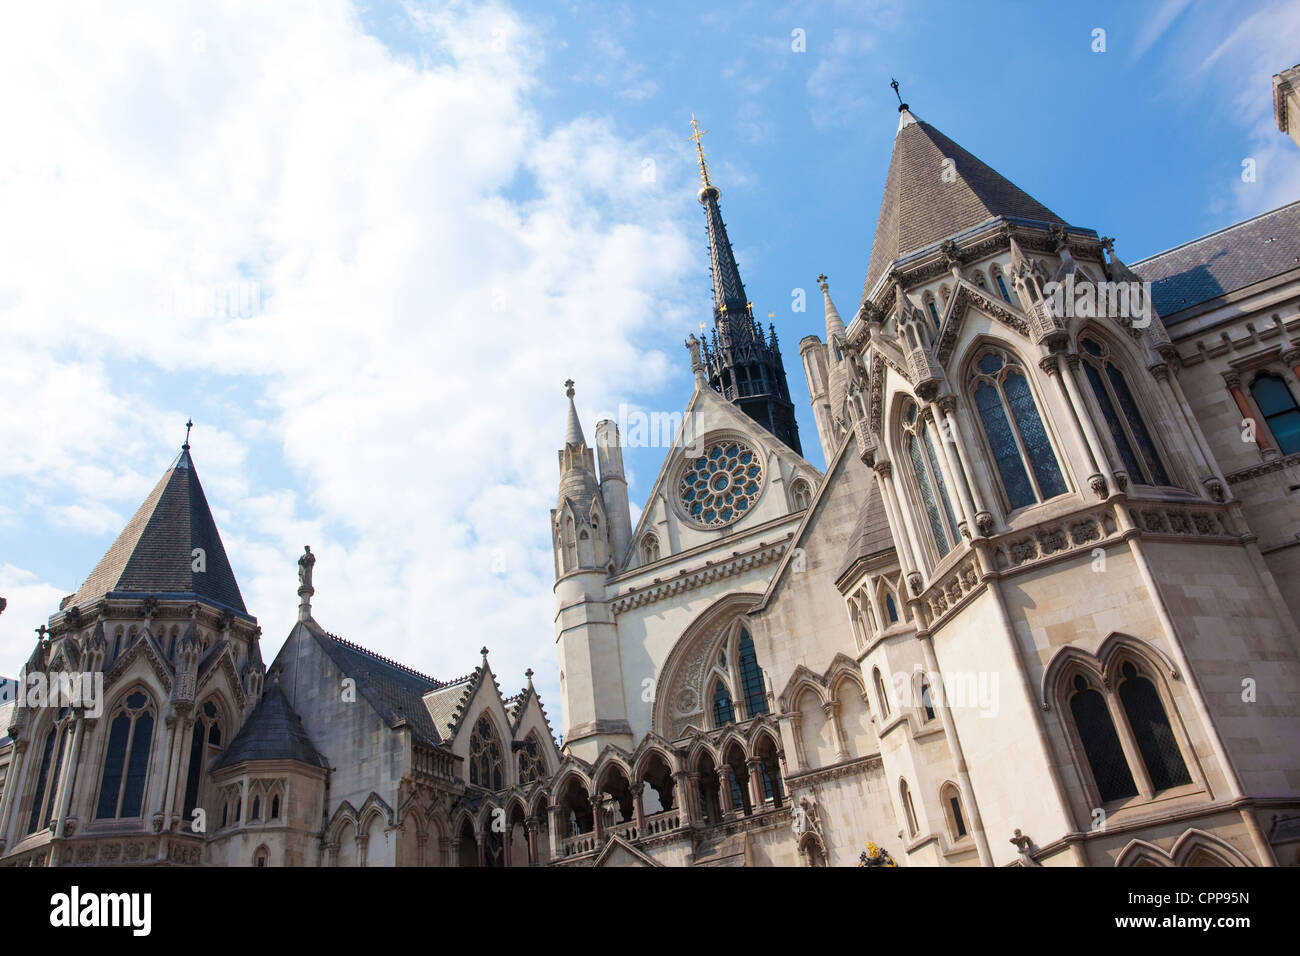 The Royal Courts of Justice, High Court, London, England, UK. Stock Photo